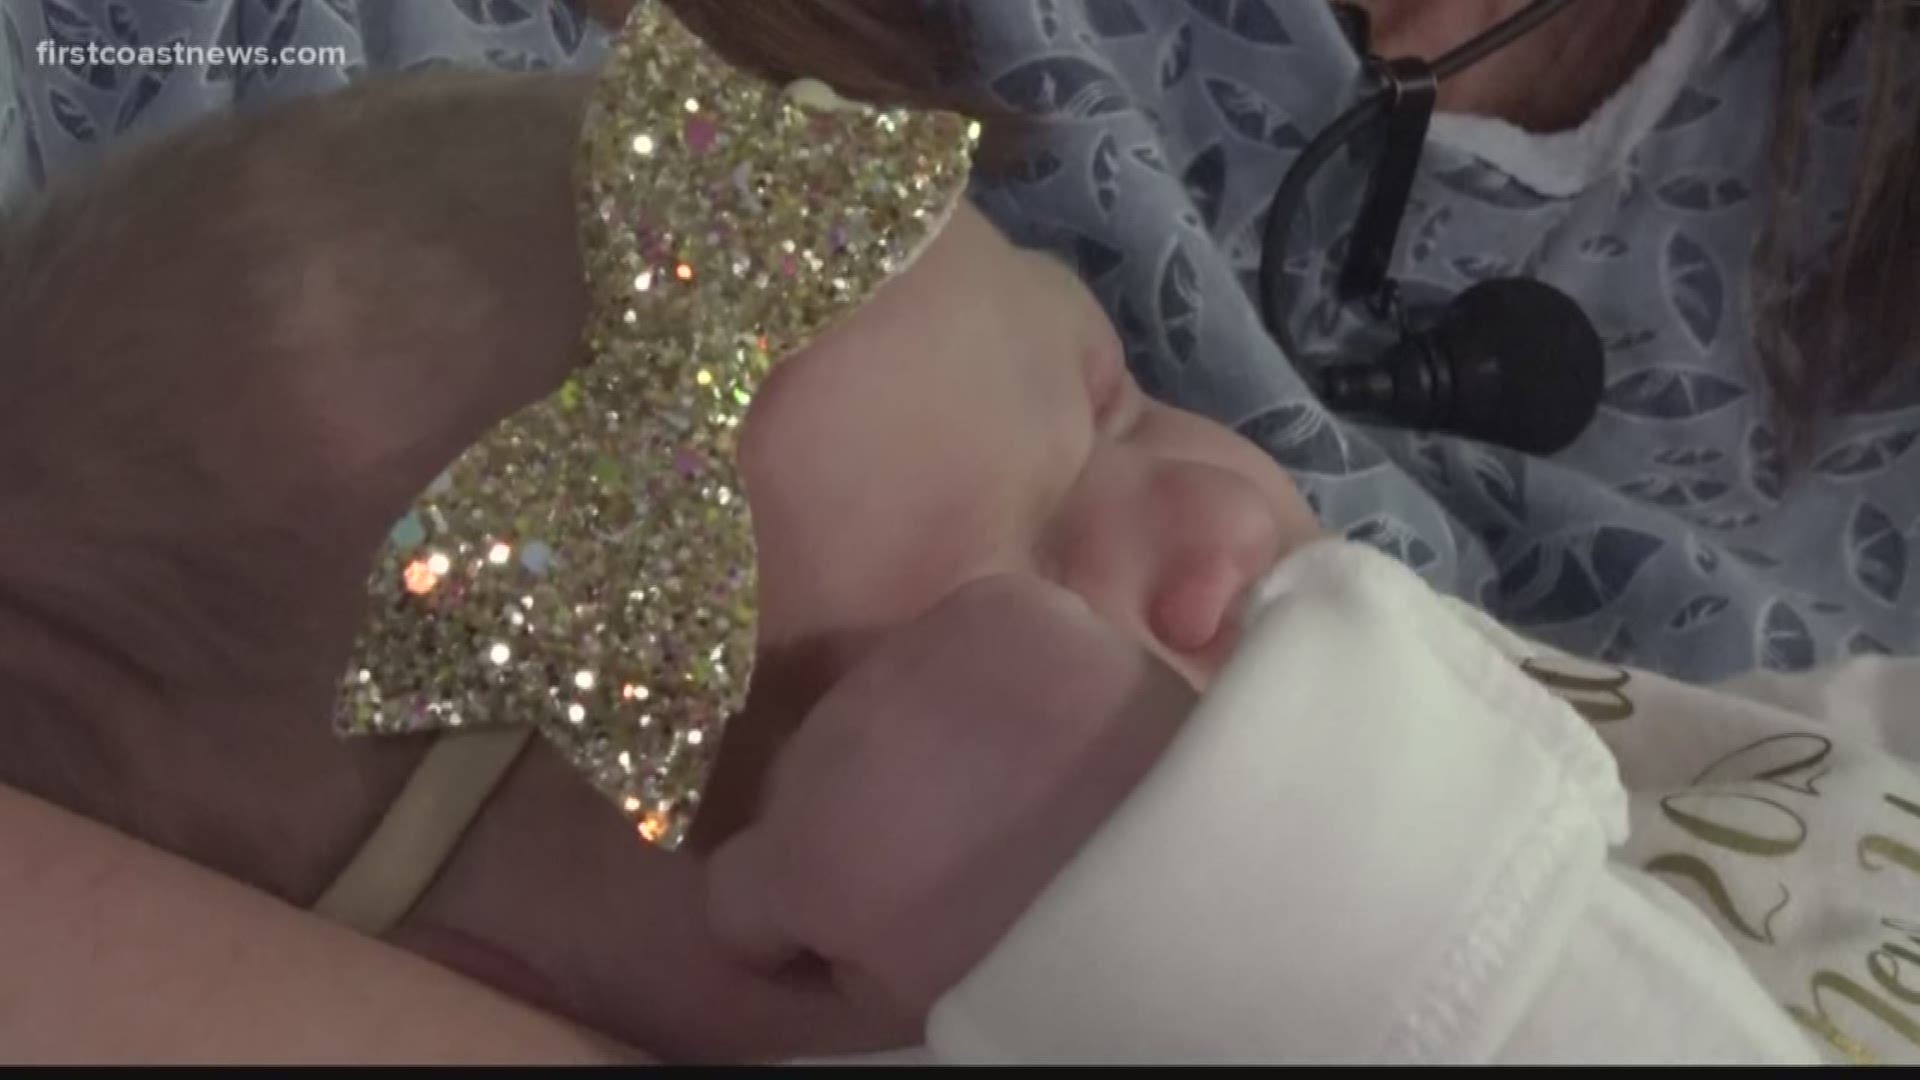 The first baby to be born in Jacksonville in 2020 was Sydney Baker, born at Baptist Medical Center South at 12:13 am.